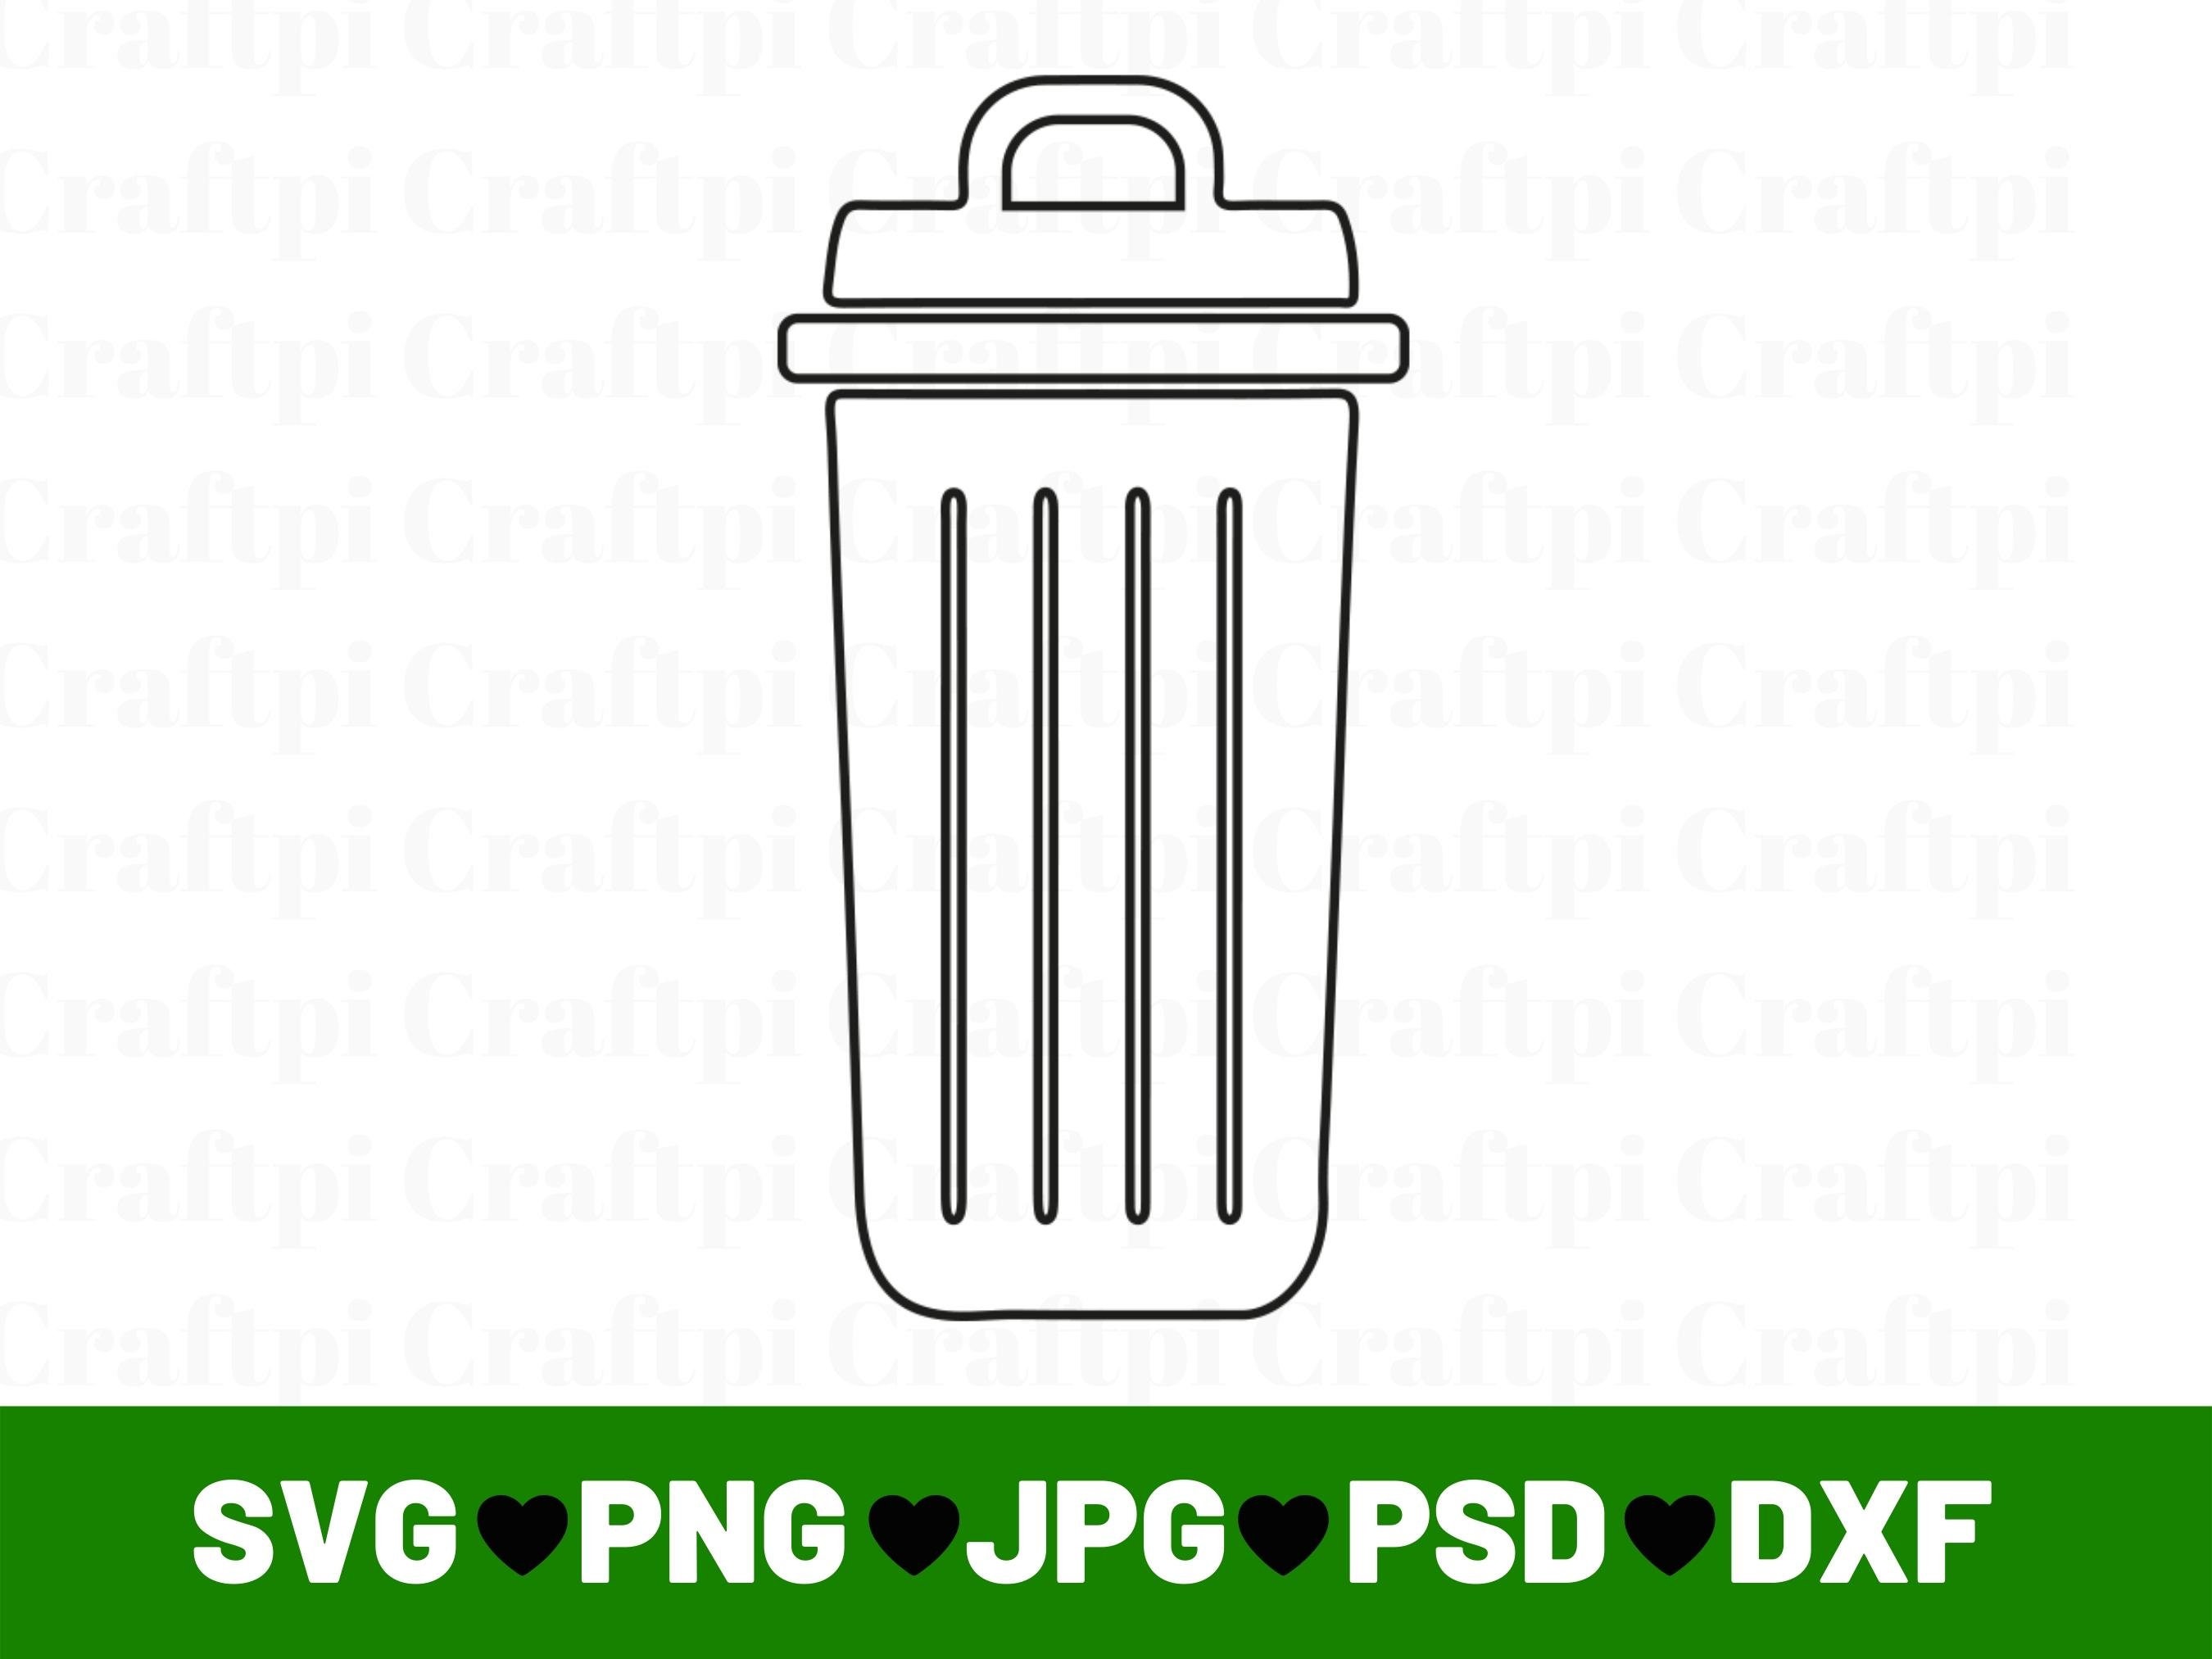 Trash Can Svg, Trash Can Clipart, Garbage Can Png, Bin Svg, Rubbish Bin  Svg, Trash Can Outline Svg, Recycle Cricut Silhouette Svg Cut File (Instant  Download) 